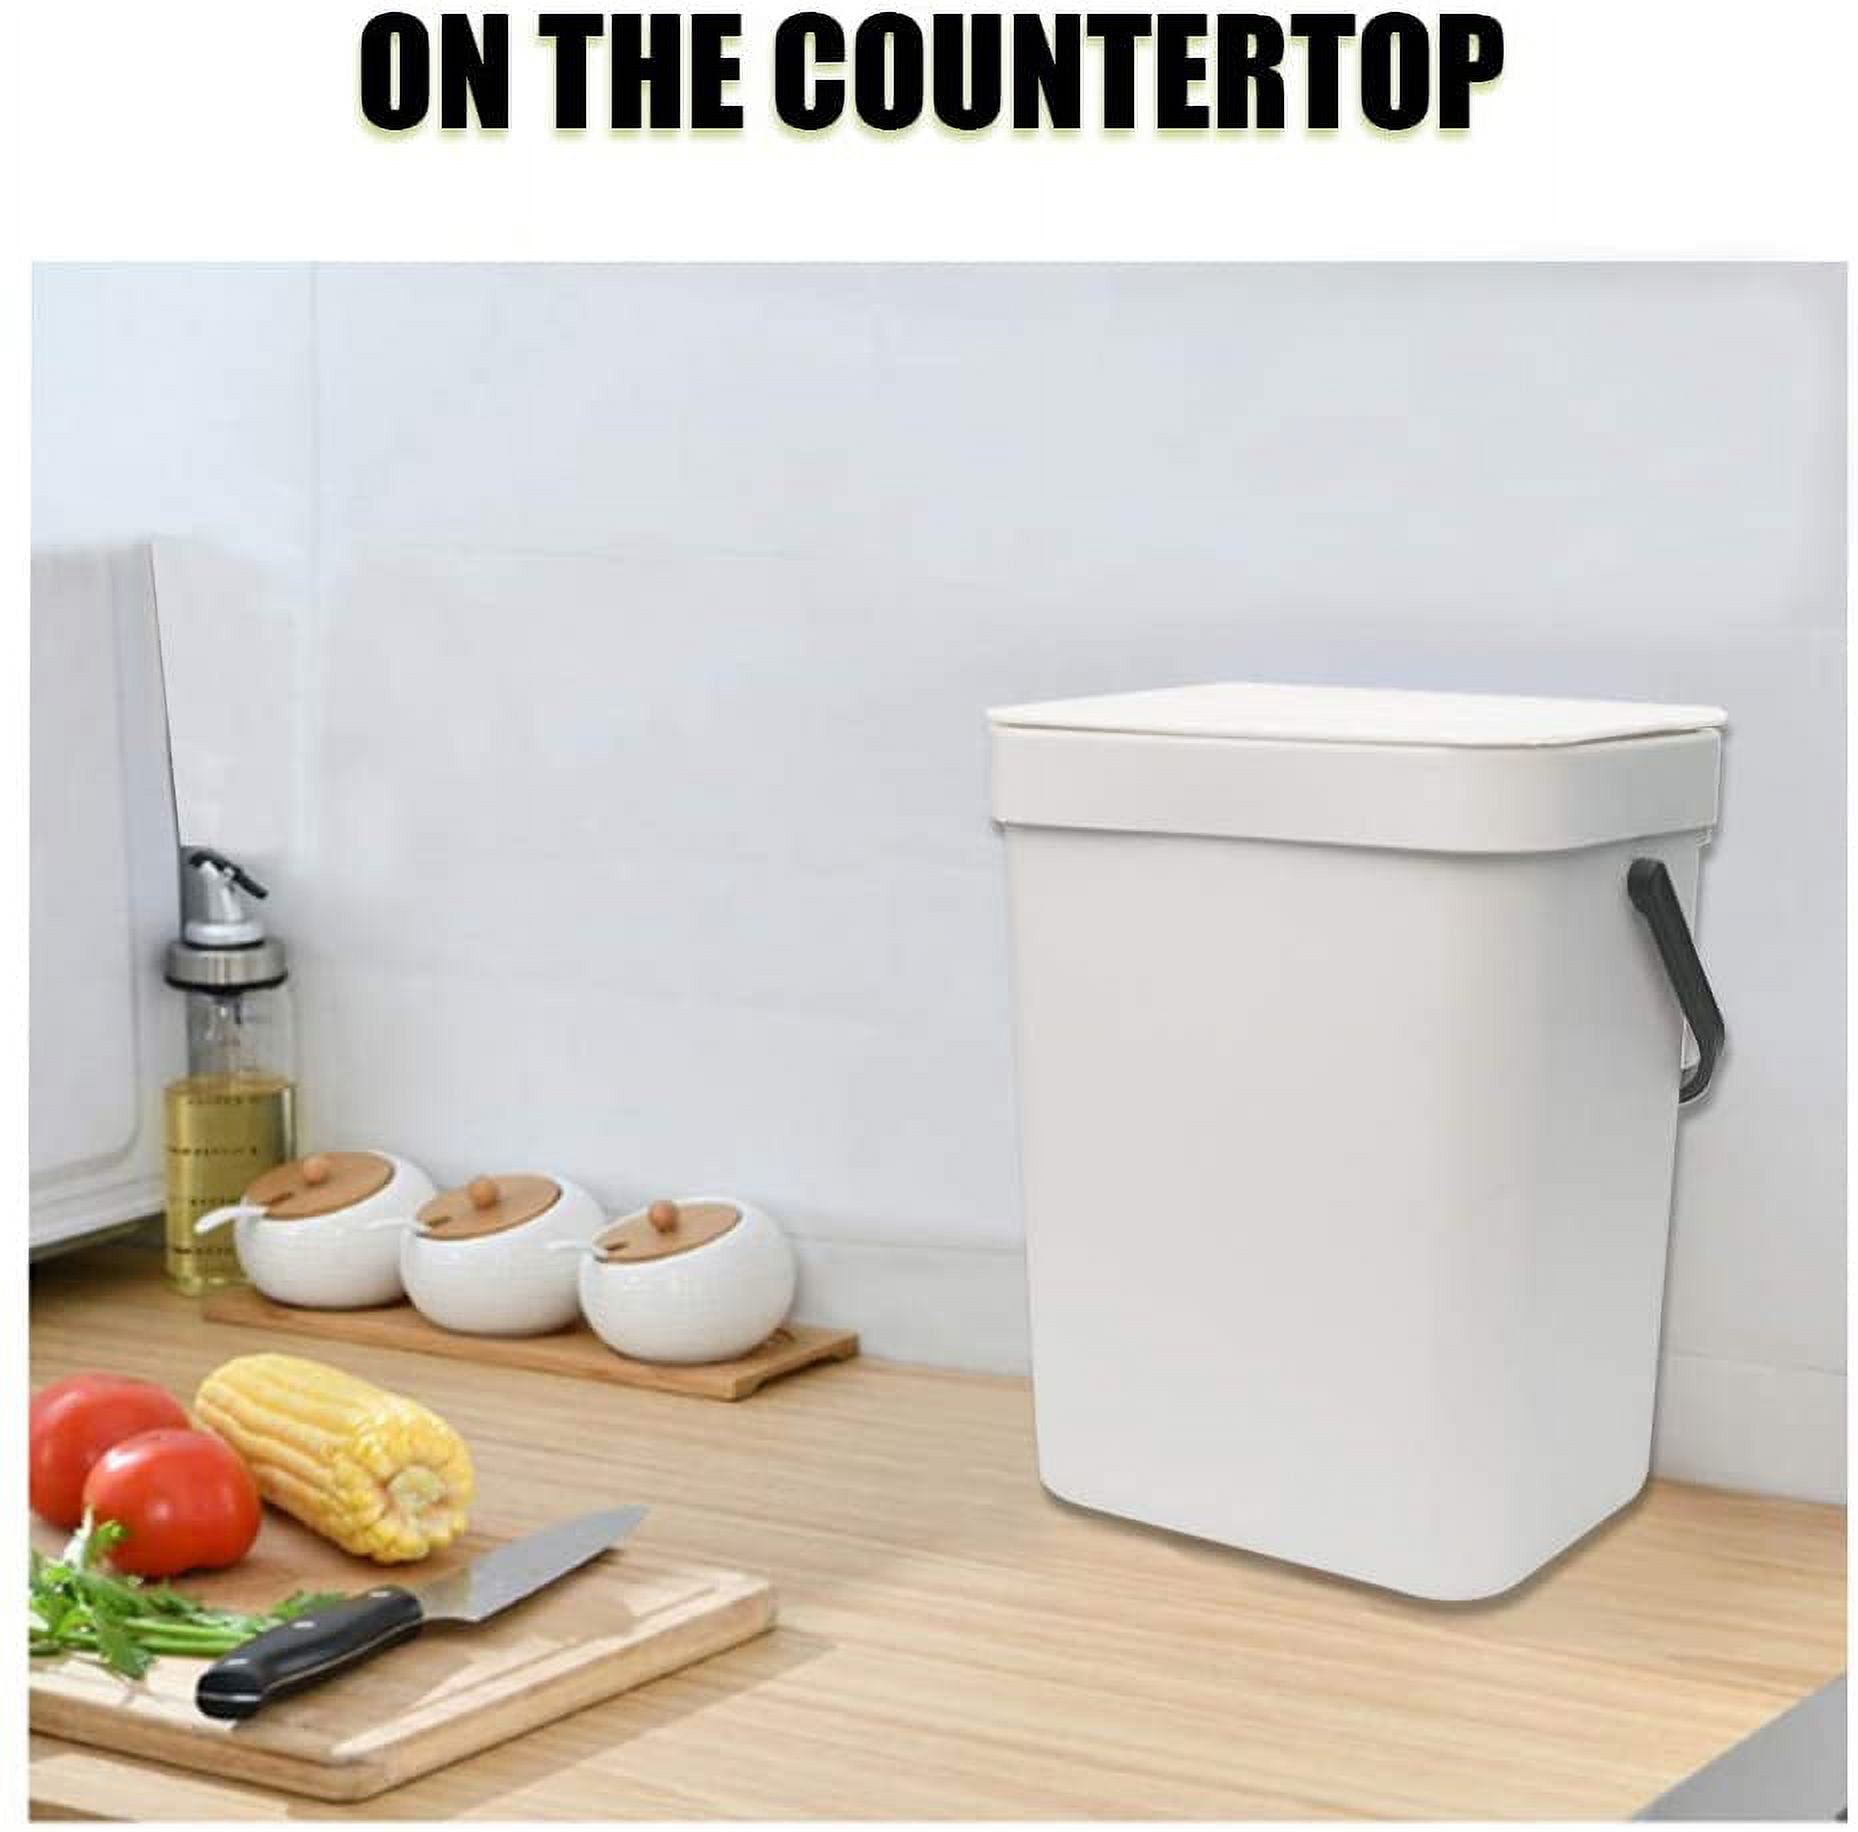 LALASTAR Food Waste Basket Bin for Kitchen, Small Countertop Compost Bin  with Lid, Odor-Free Food Scrap Container, Wall Mounted Garbage Can, 3L/0.8